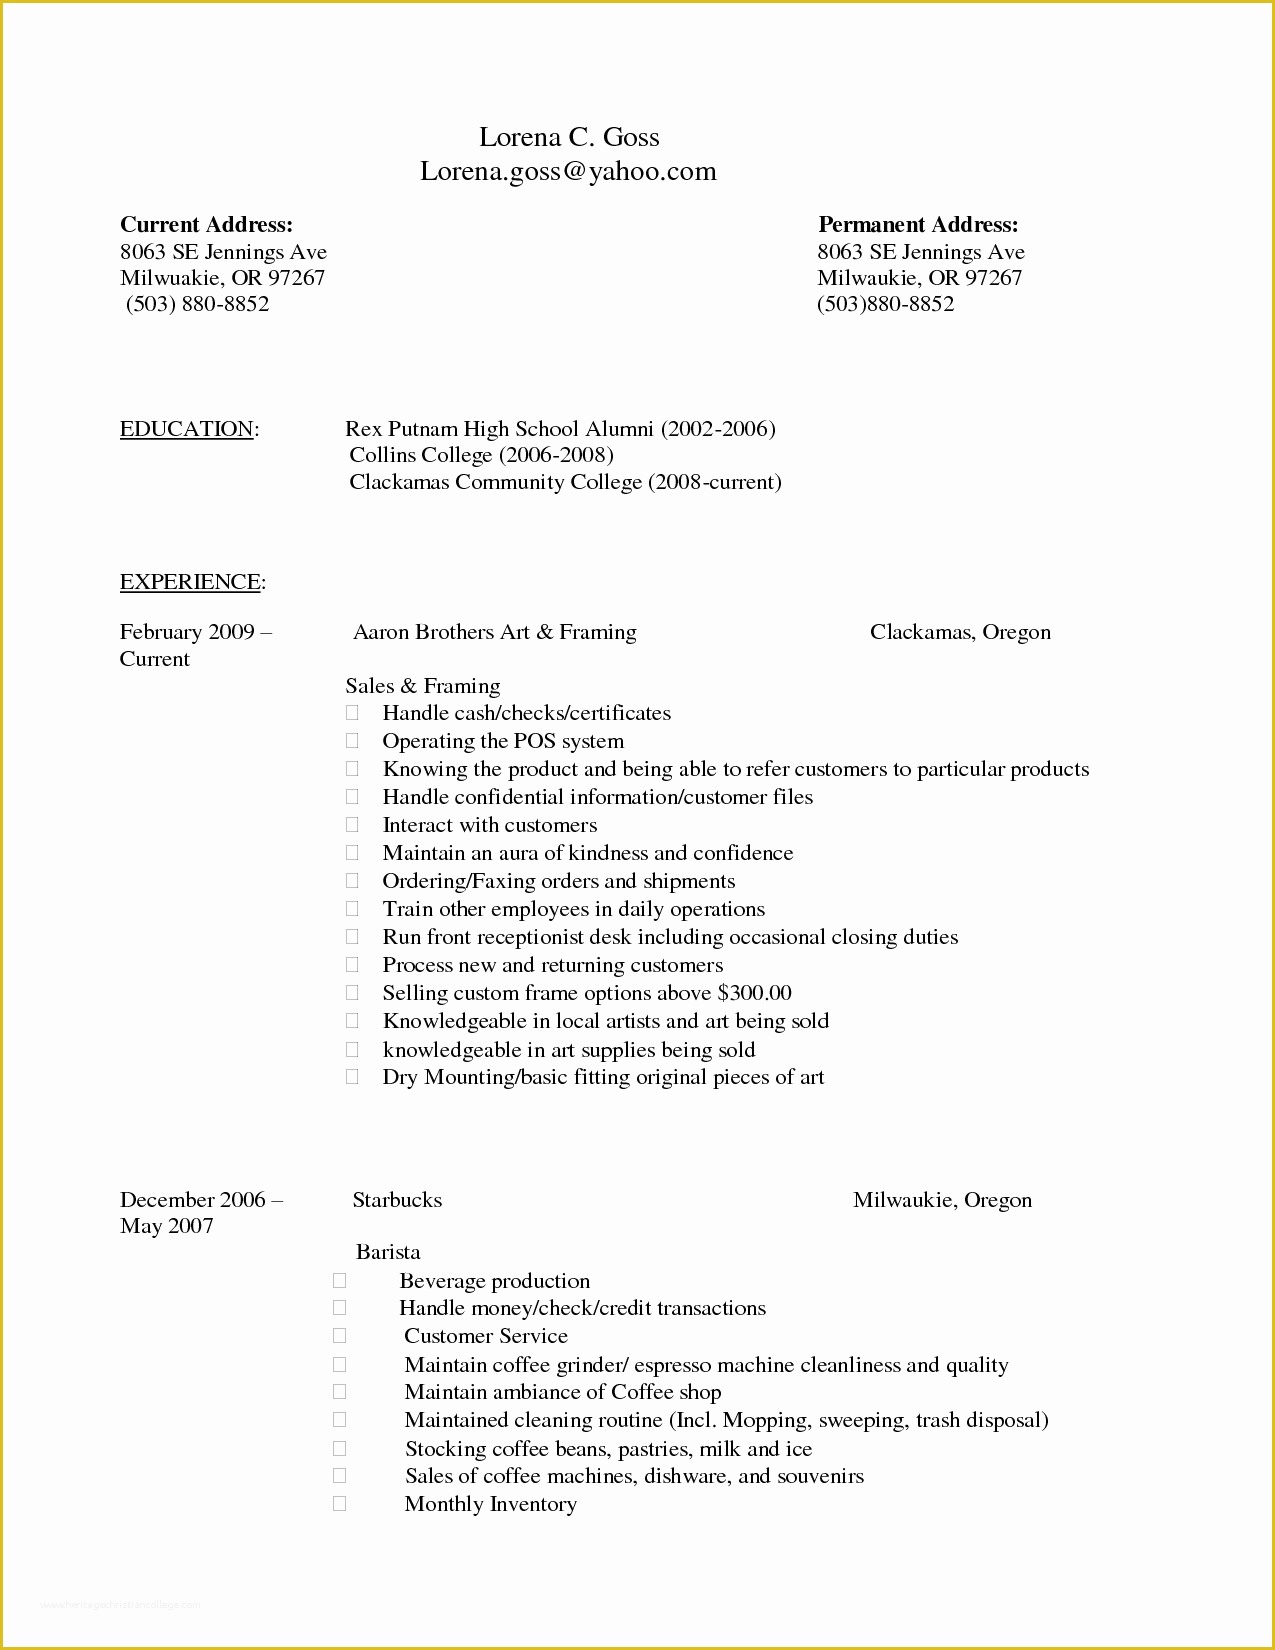 Free Resume Outline Template Of Best S Of Fill In the Blank Resume Fill In Blank